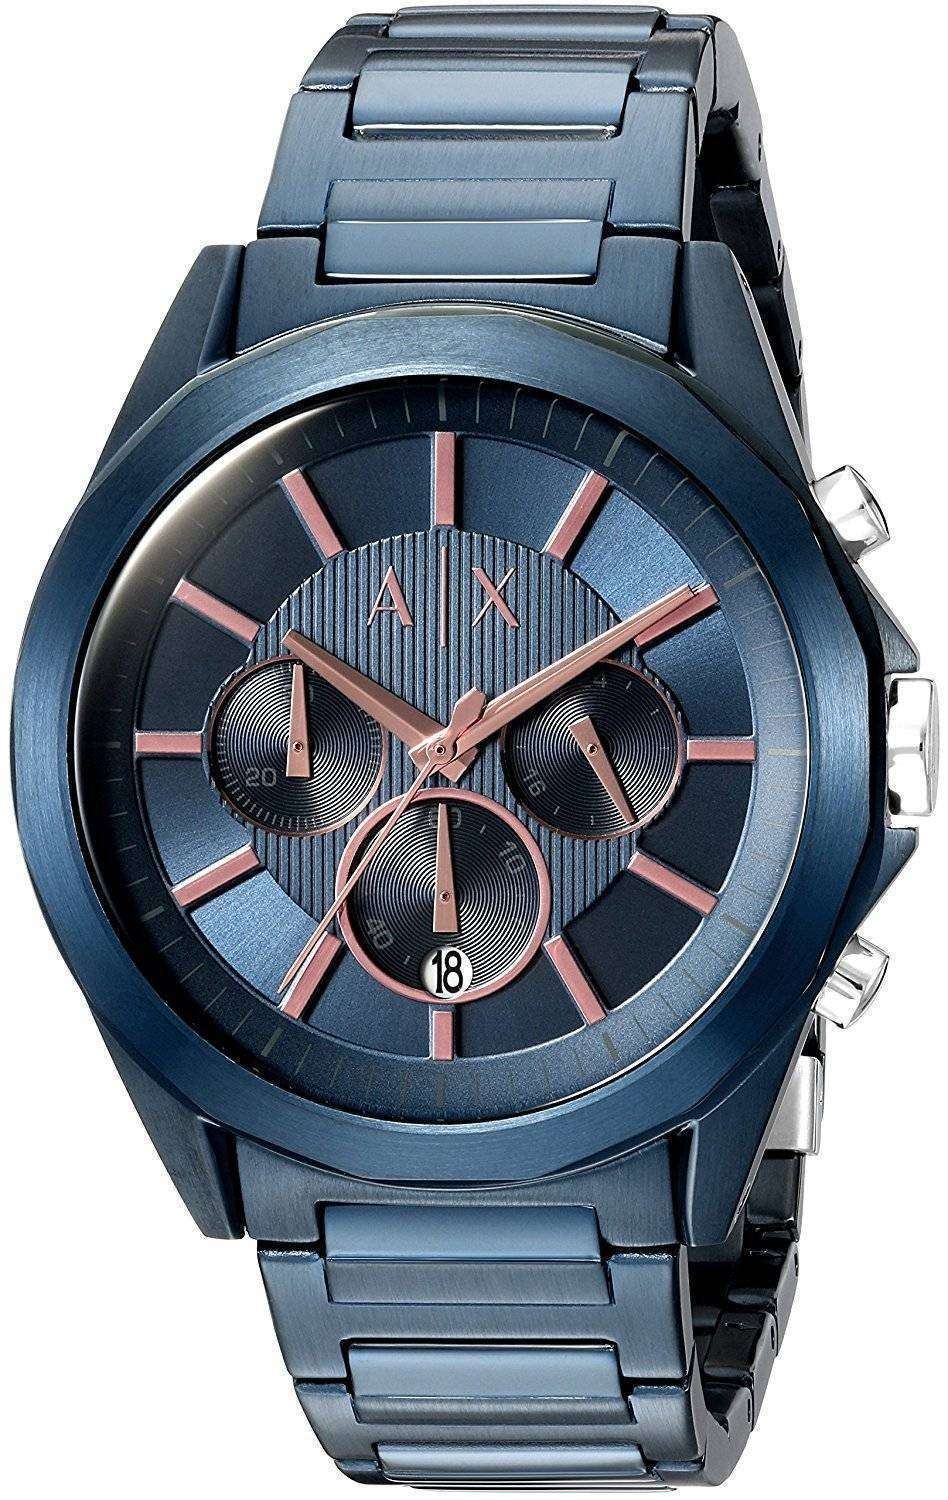 Men's Chronograph Stainless Steel Blue Dial Watch | Armani Exchange AX2607  | World of Watches